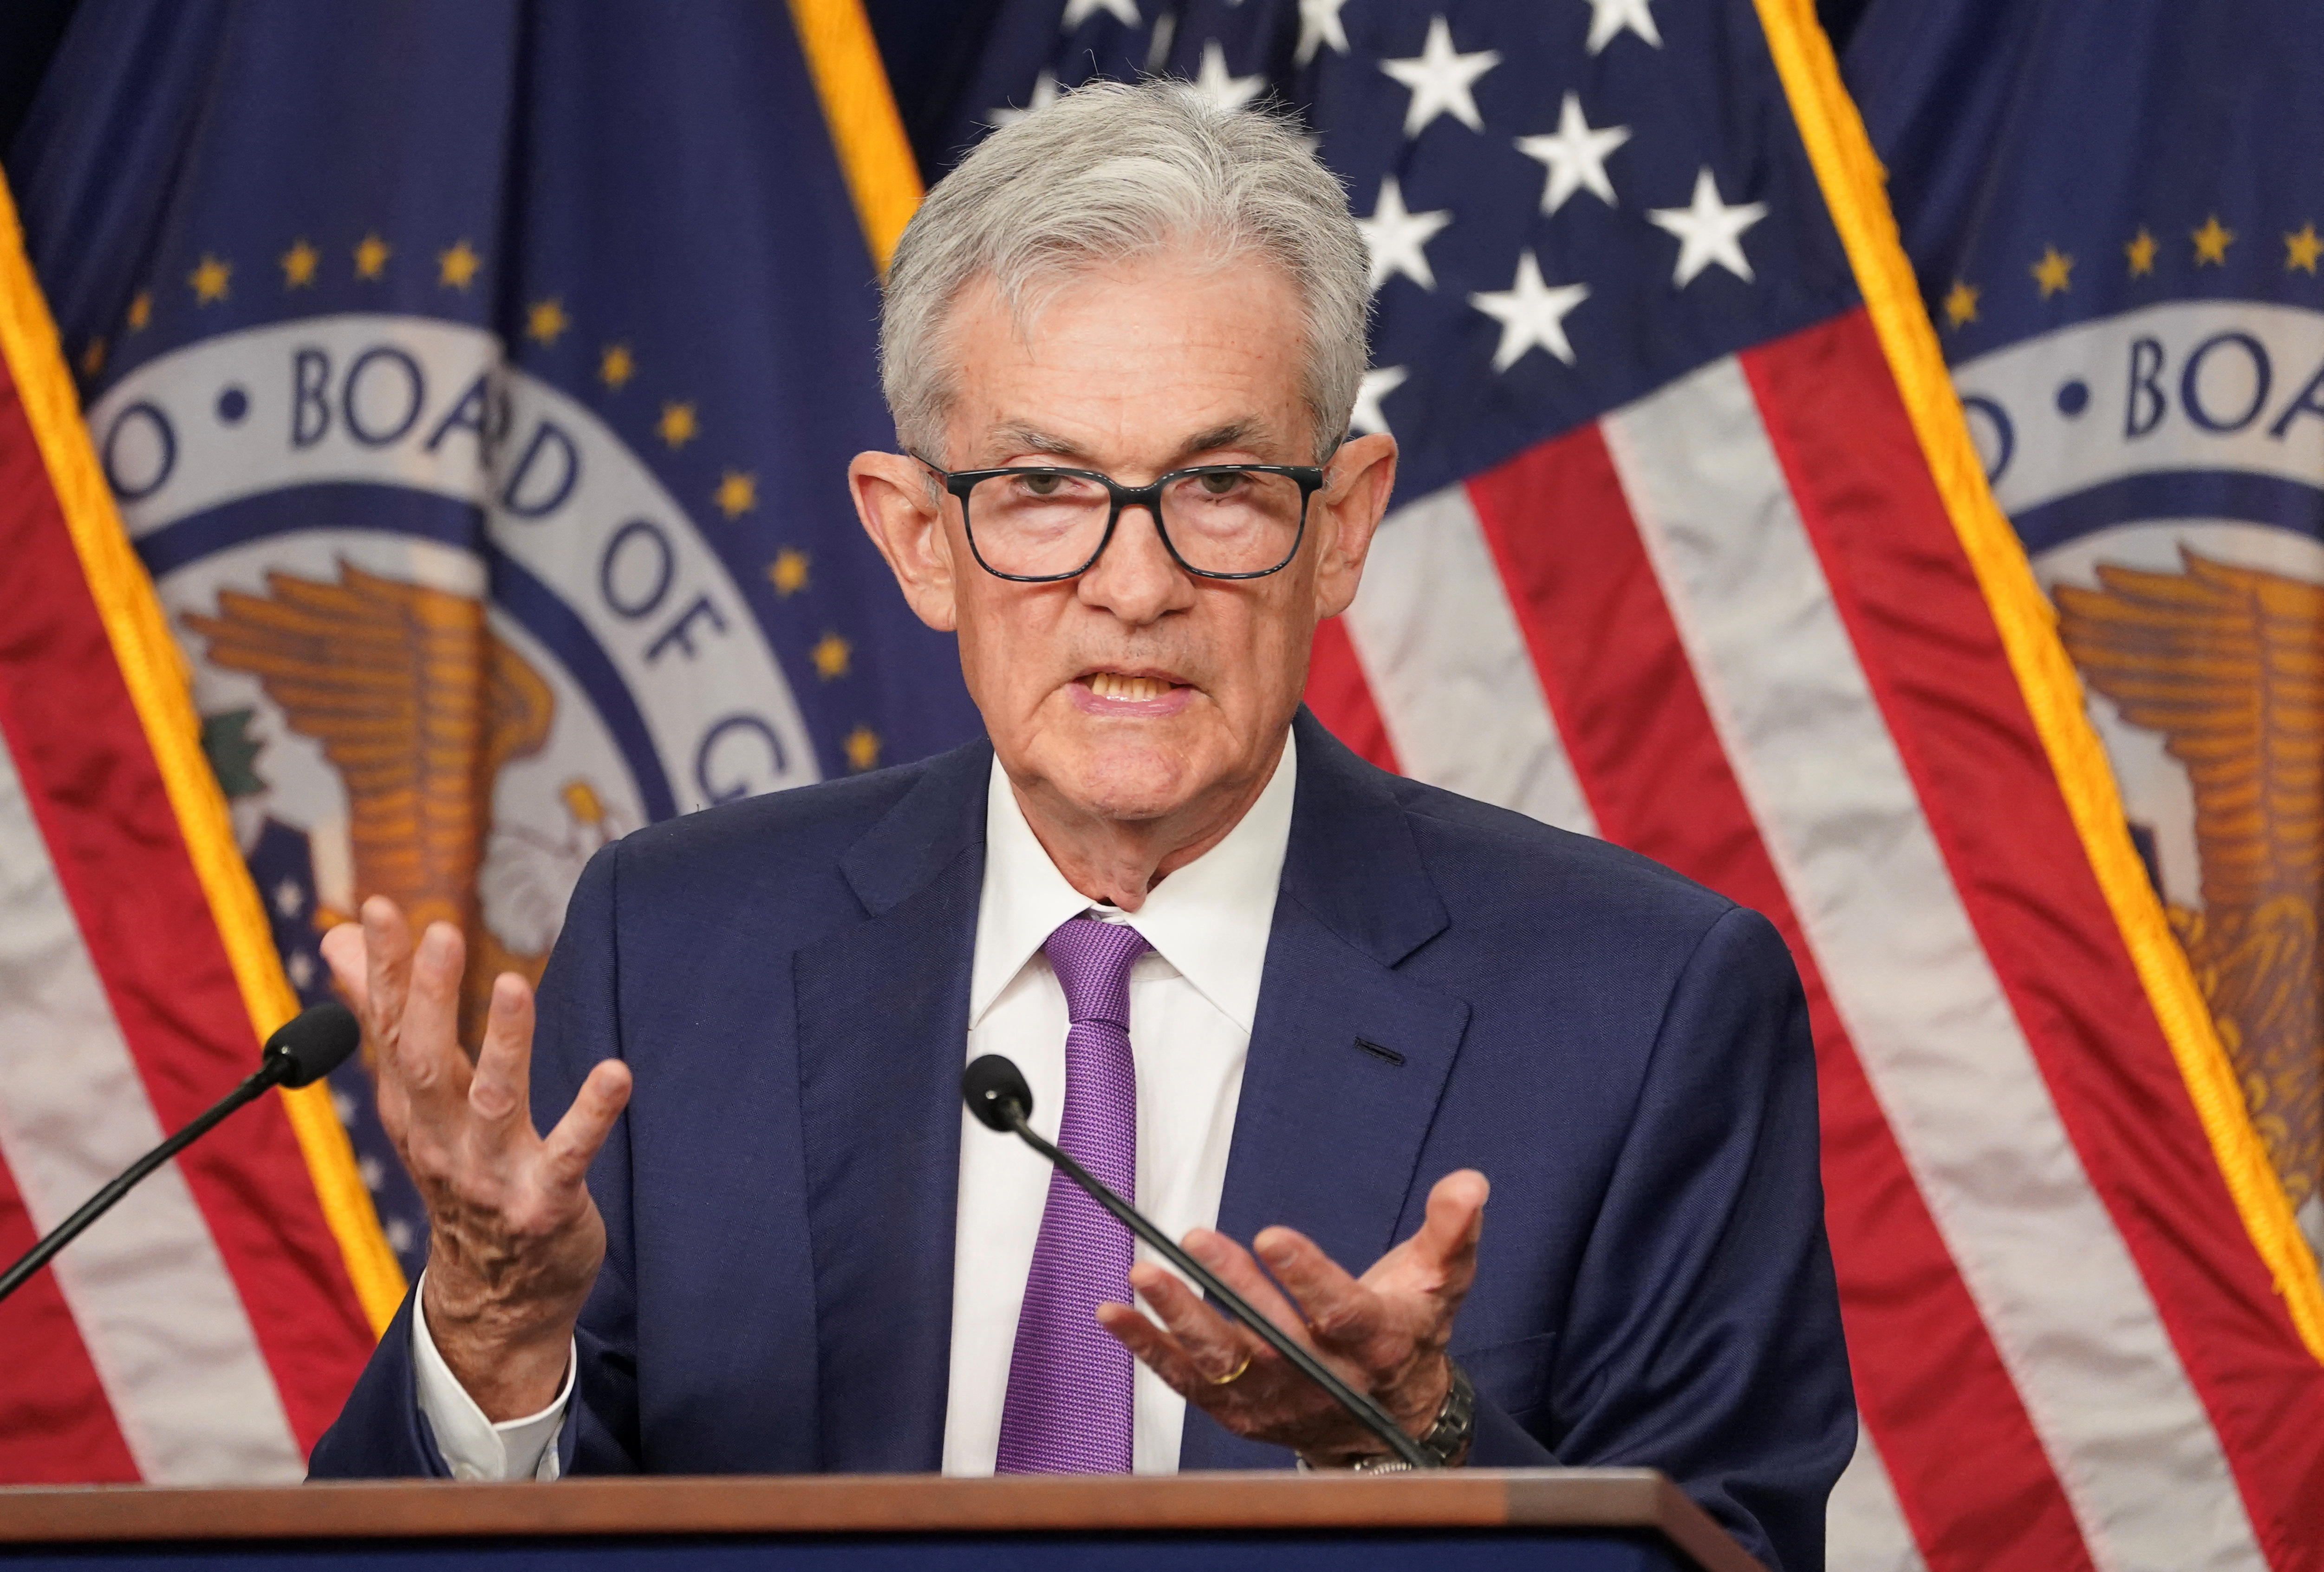 Fed chair Powell speaks at a press conference  in Washington